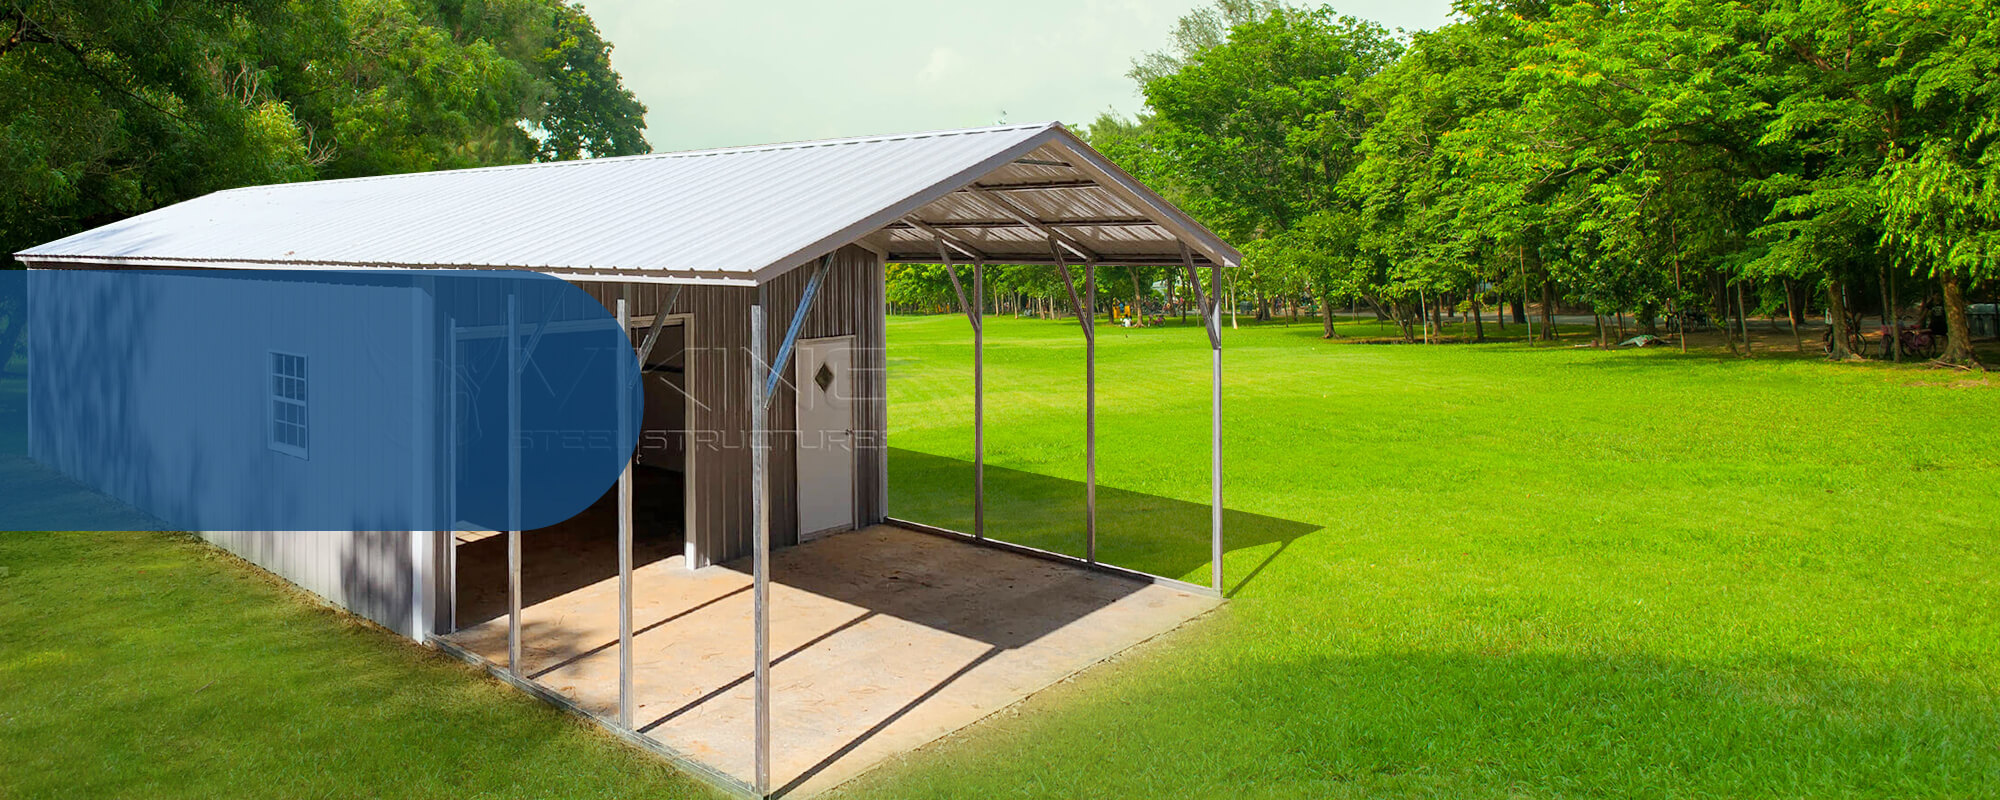 Buy Lean To Carport Lean To Metal Carports For Sale